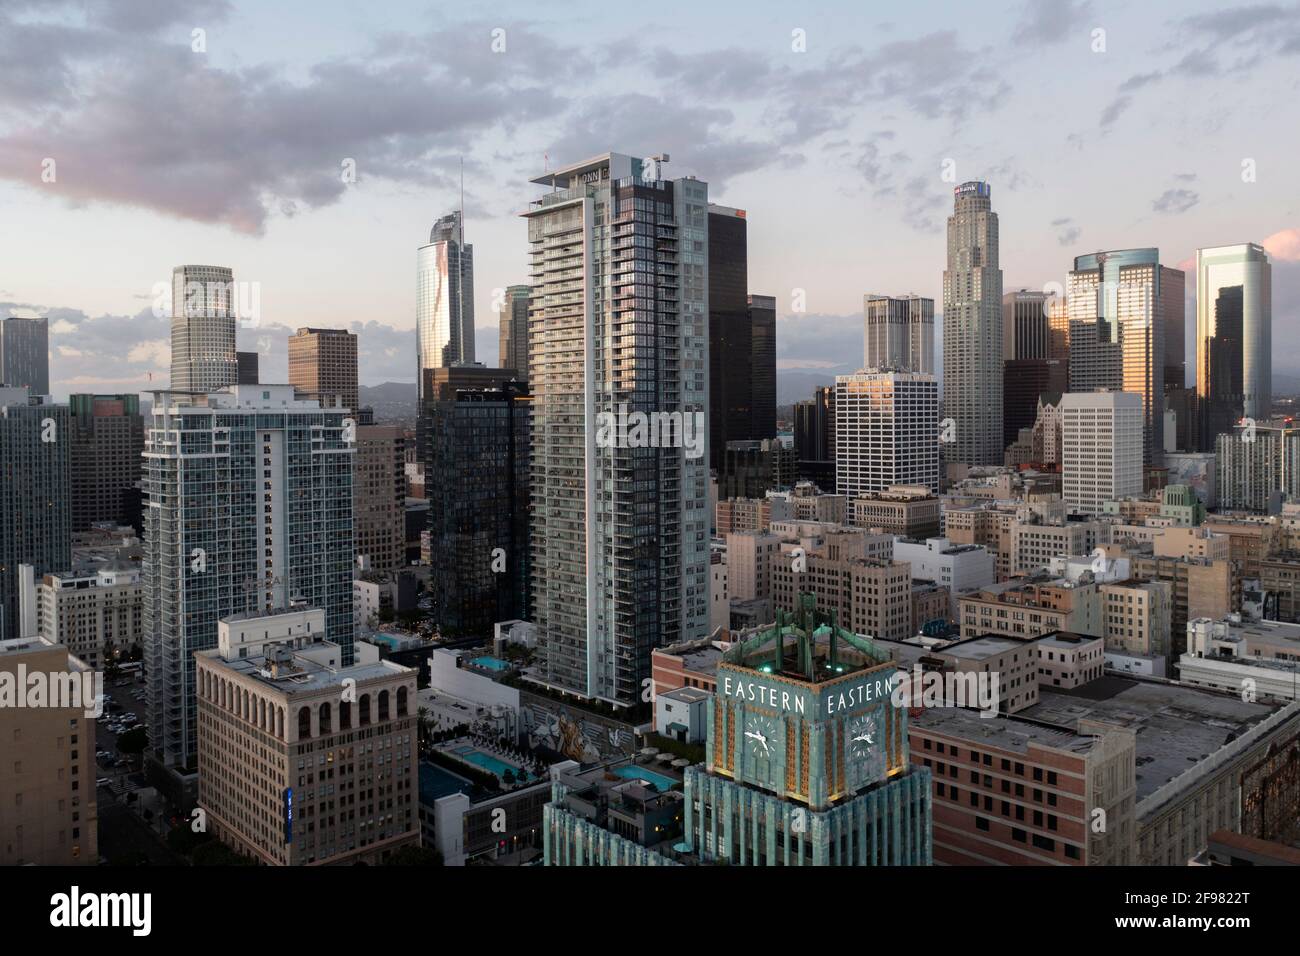 Towers of downtown urban Los Angeles with landmark Eastern Building Stock Photo